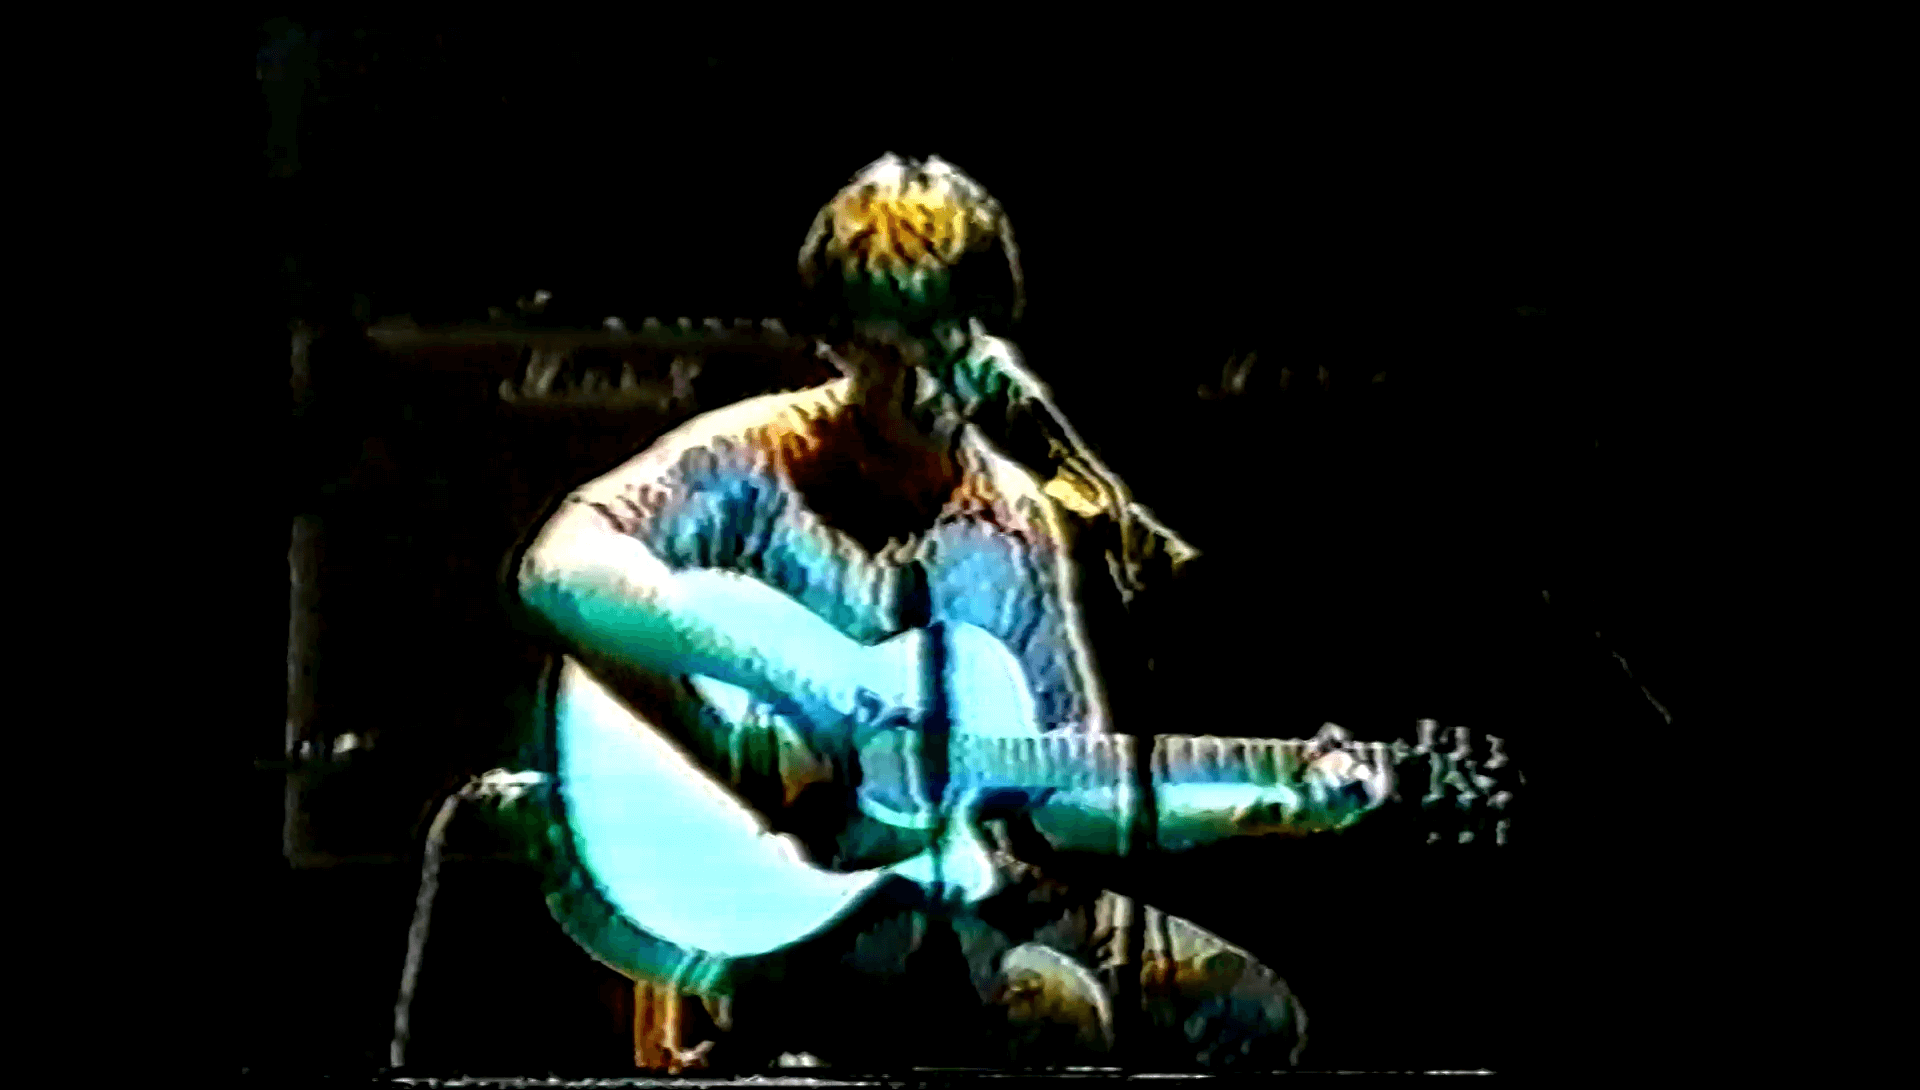 Oasis at Newport Center; Wales - August 6, 1998